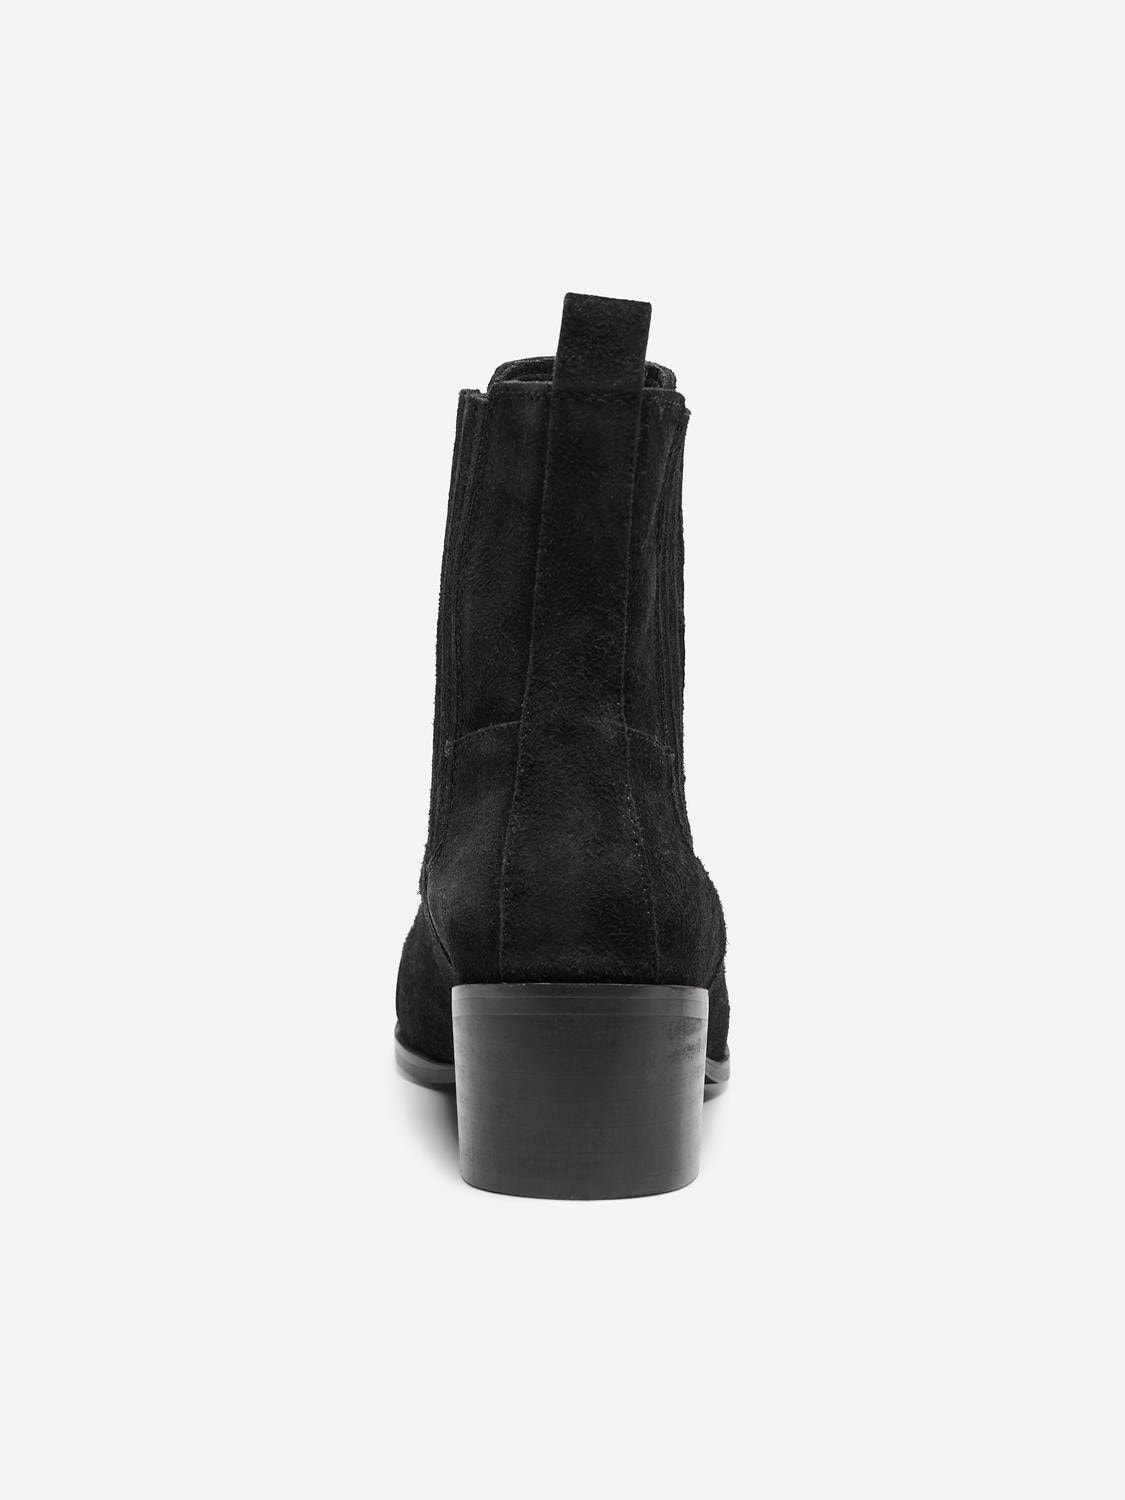 ONLY Pointed toe Boots -Black - 15287475